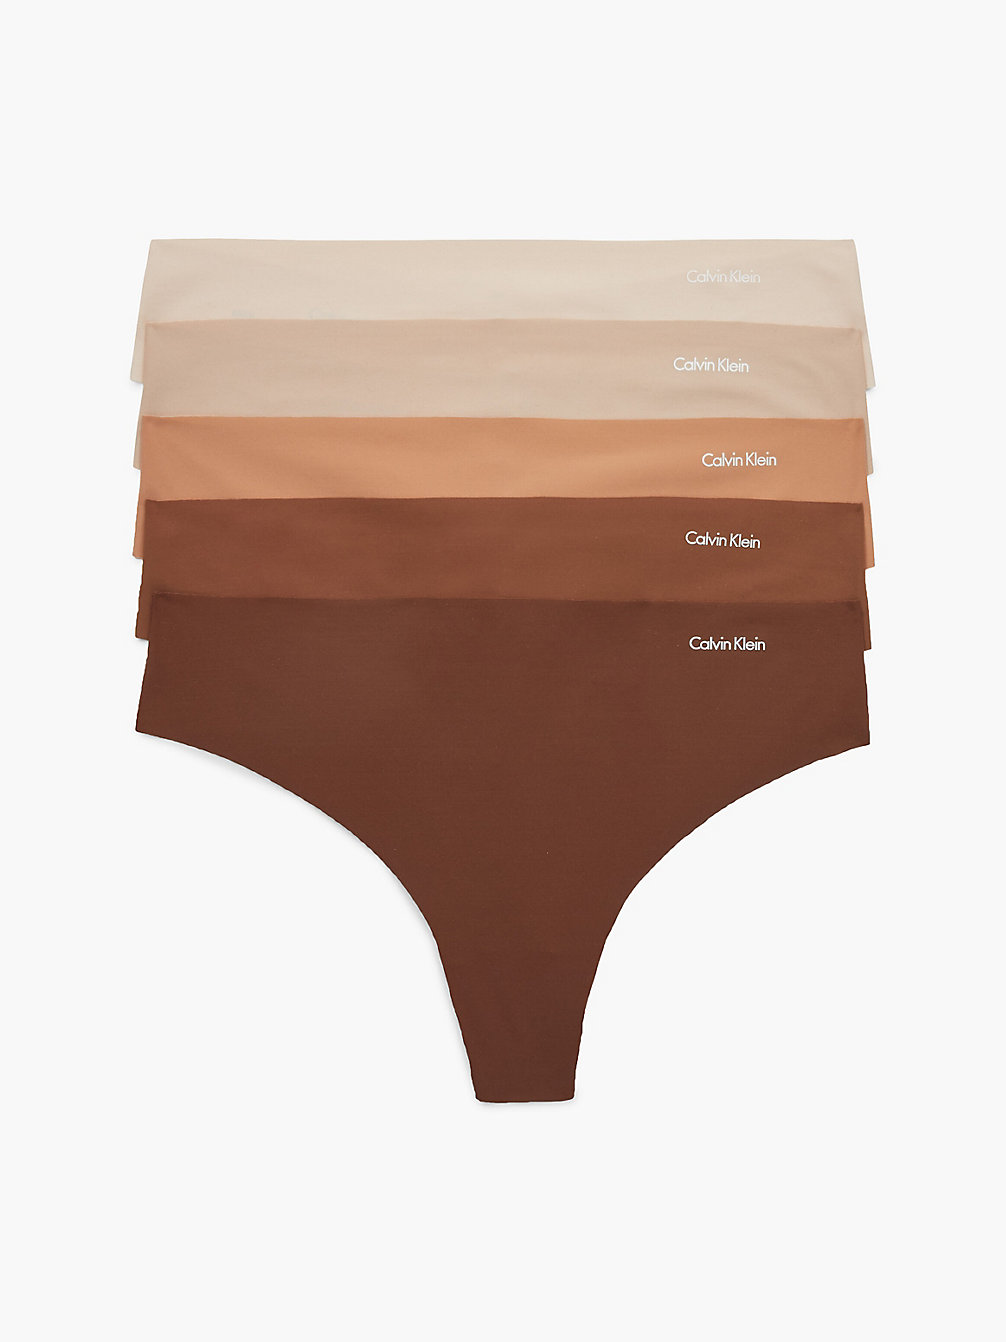 Pack De 5 Tangas - Invisibles > B/C/S/S/U > undefined mujer > Calvin Klein